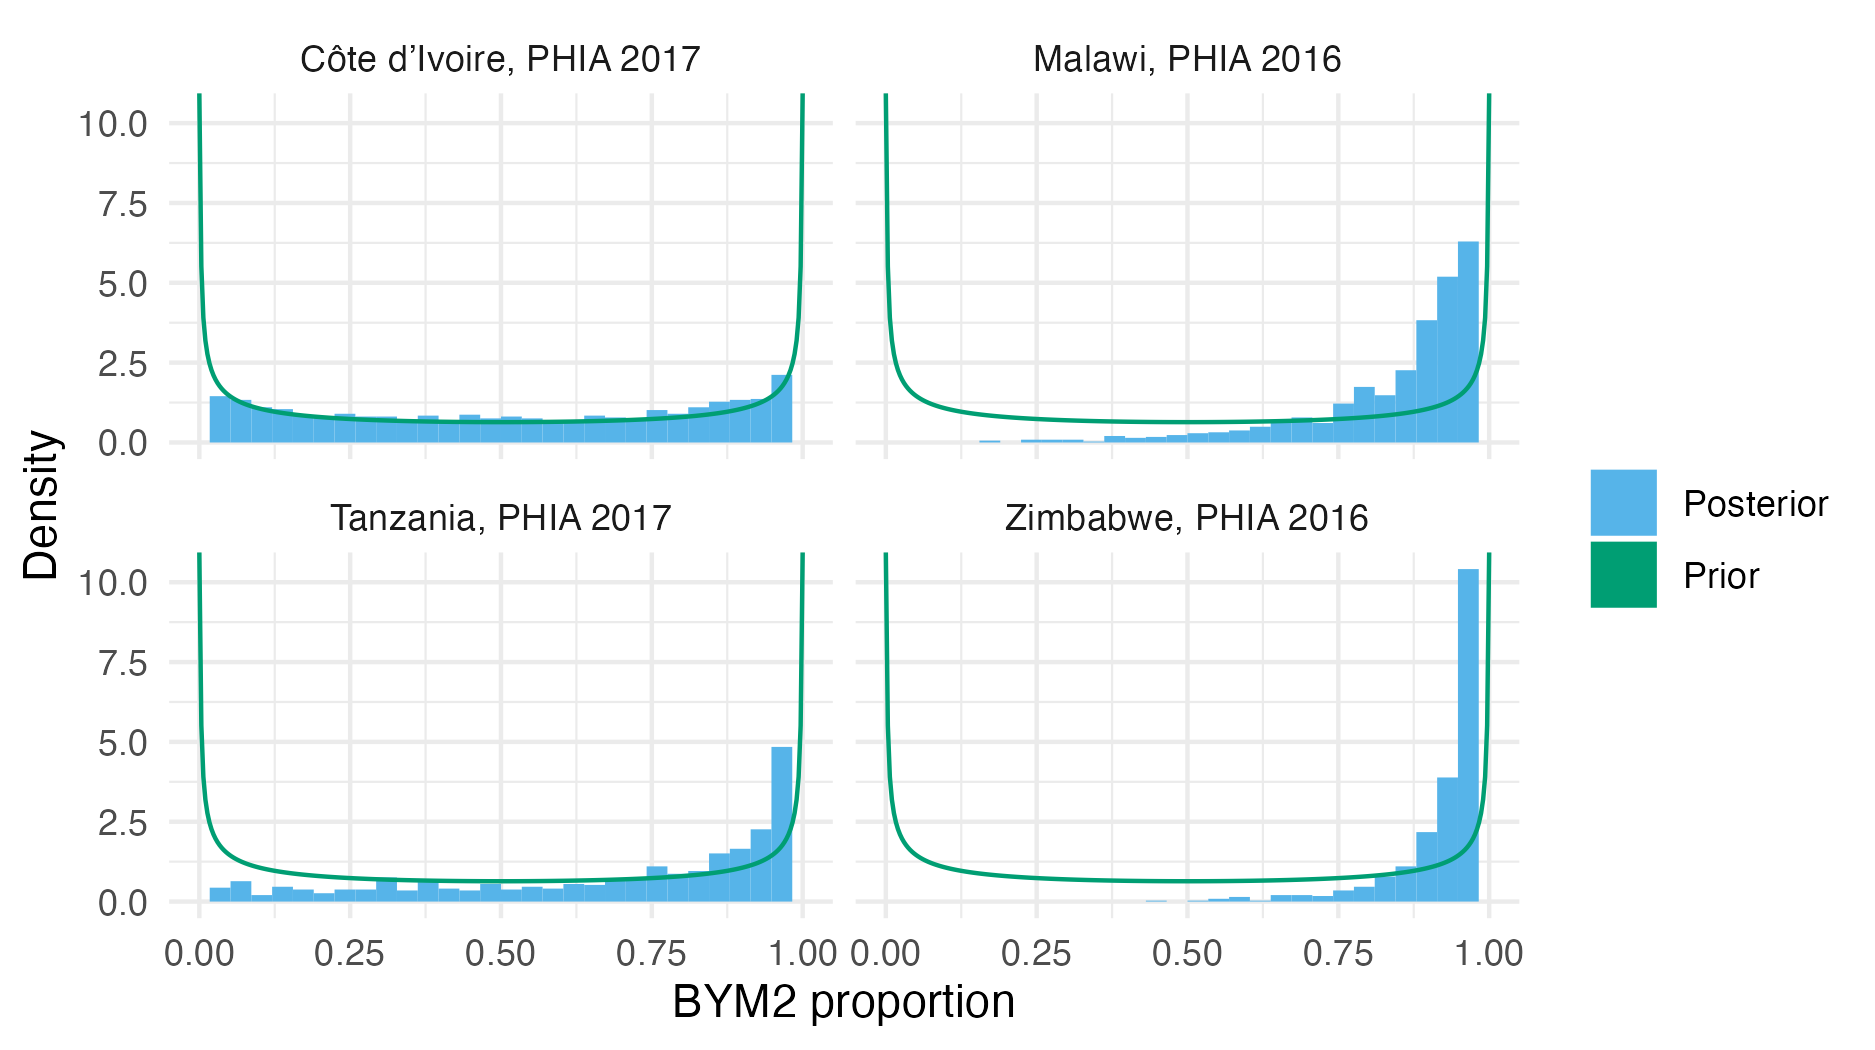 The BYM2 proportion hyperparameter prior and posterior distributions for each of the four considered PHIA surveys (Table 4.3). A value of zero corresponds to IID noise. A value of one corresponds to Besag noise. For each survey, excluding the Côte d’Ivoire 2017 PHIA, the posterior distribution for the BYM2 proportion is concentrated towards a value of one. This result can be interpreted as suggesting that the variation in HIV prevalence from these surveys is spatially structured.